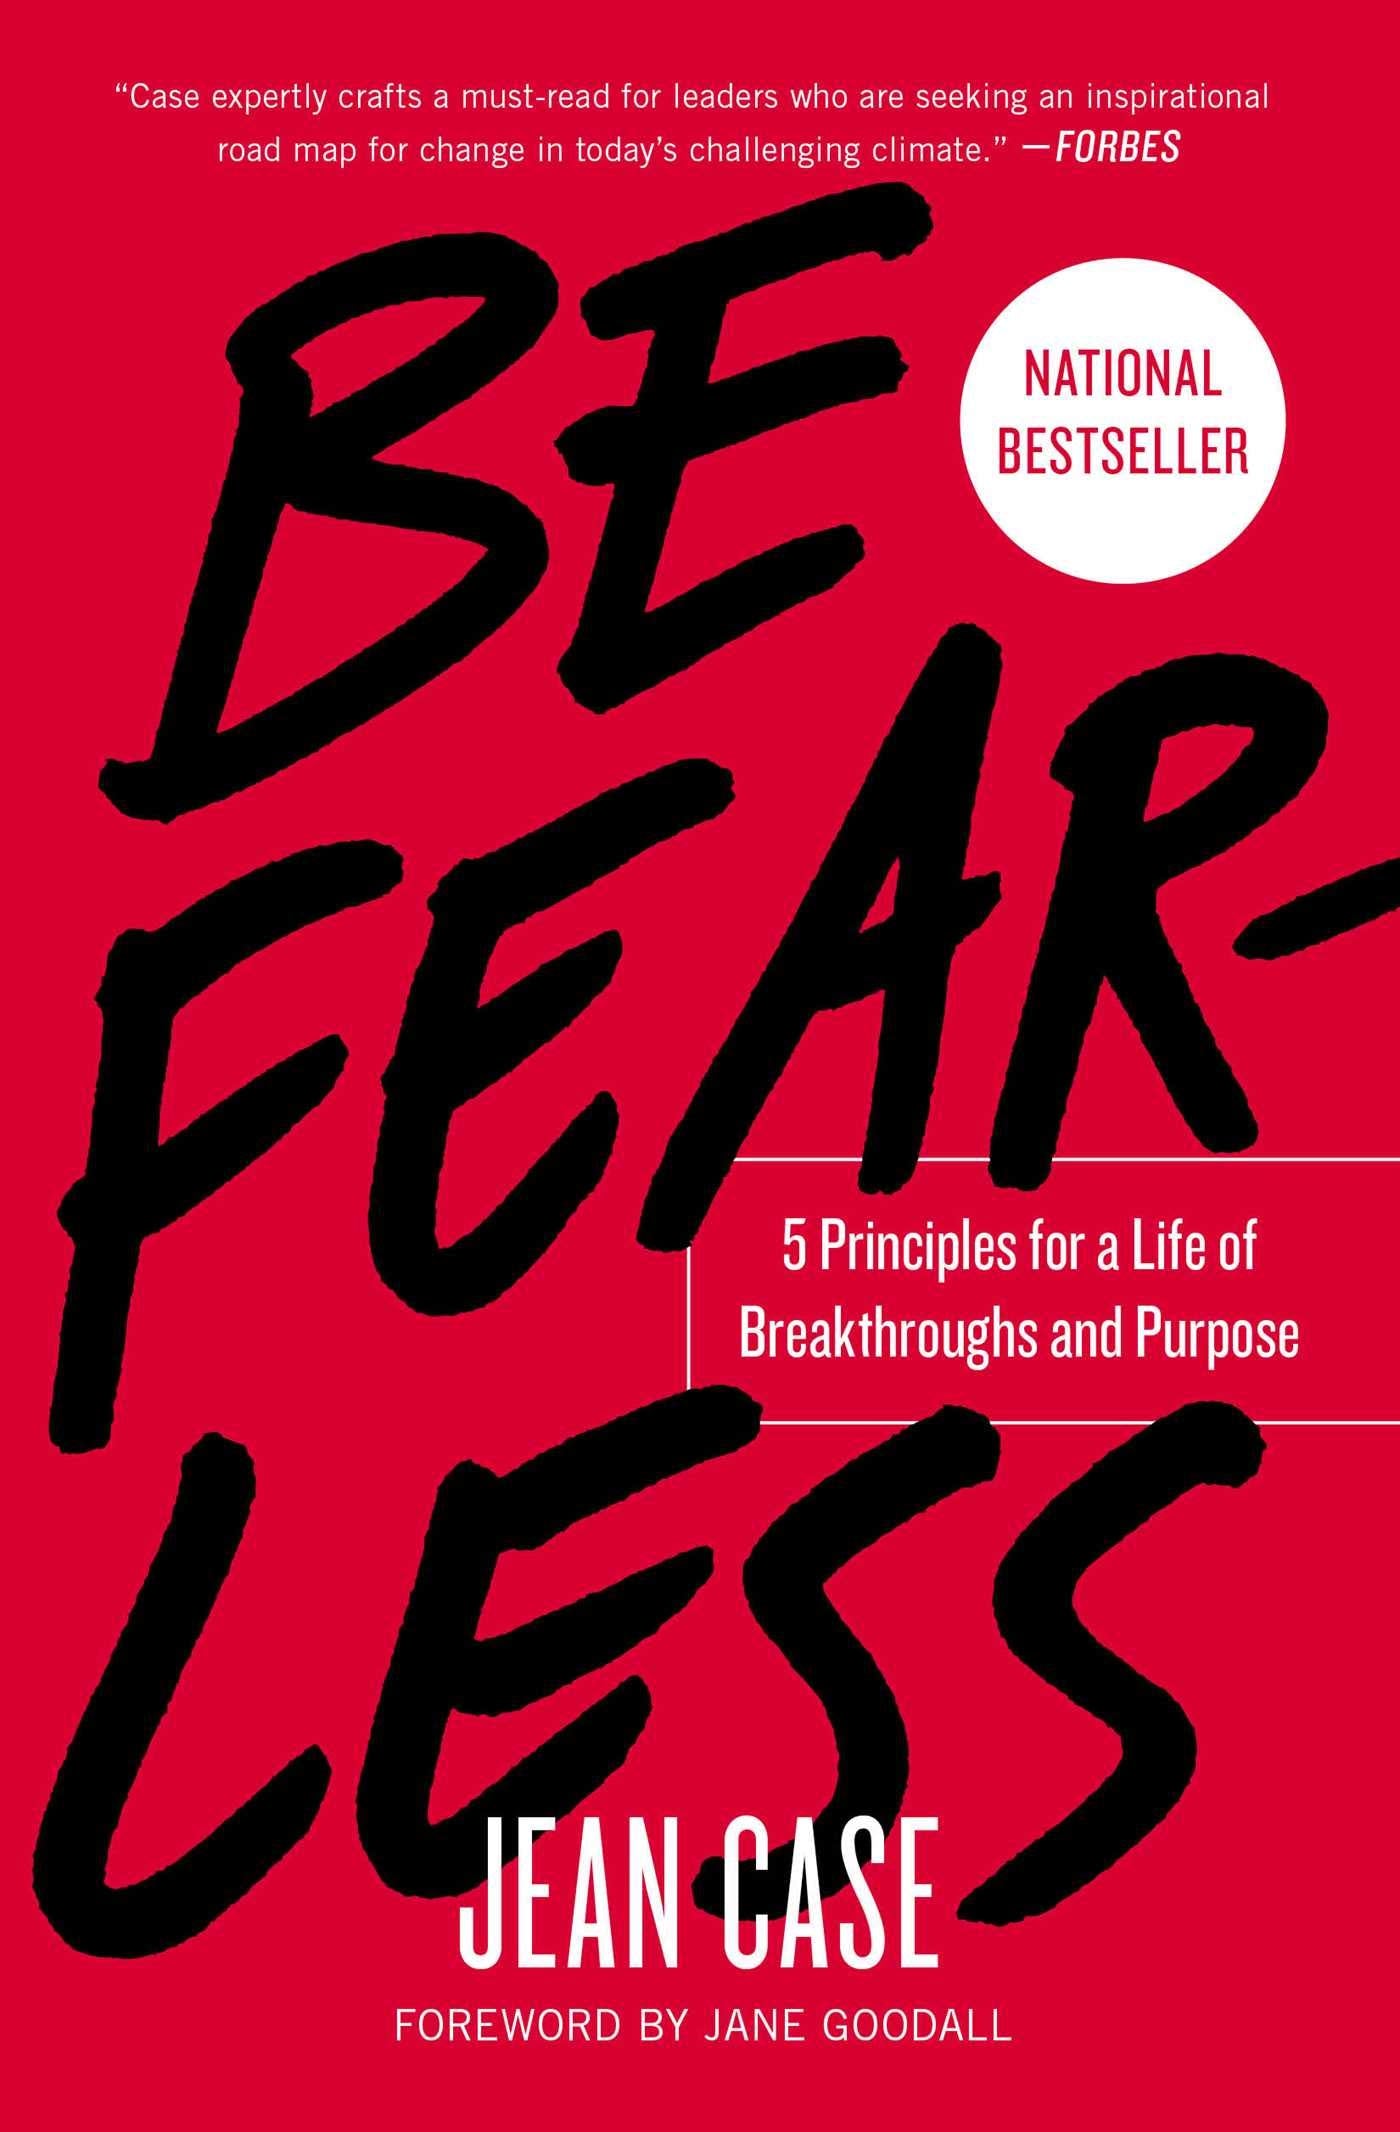 *Be Fearless: 5 Principles for a Life of Breakthroughs and Purpose